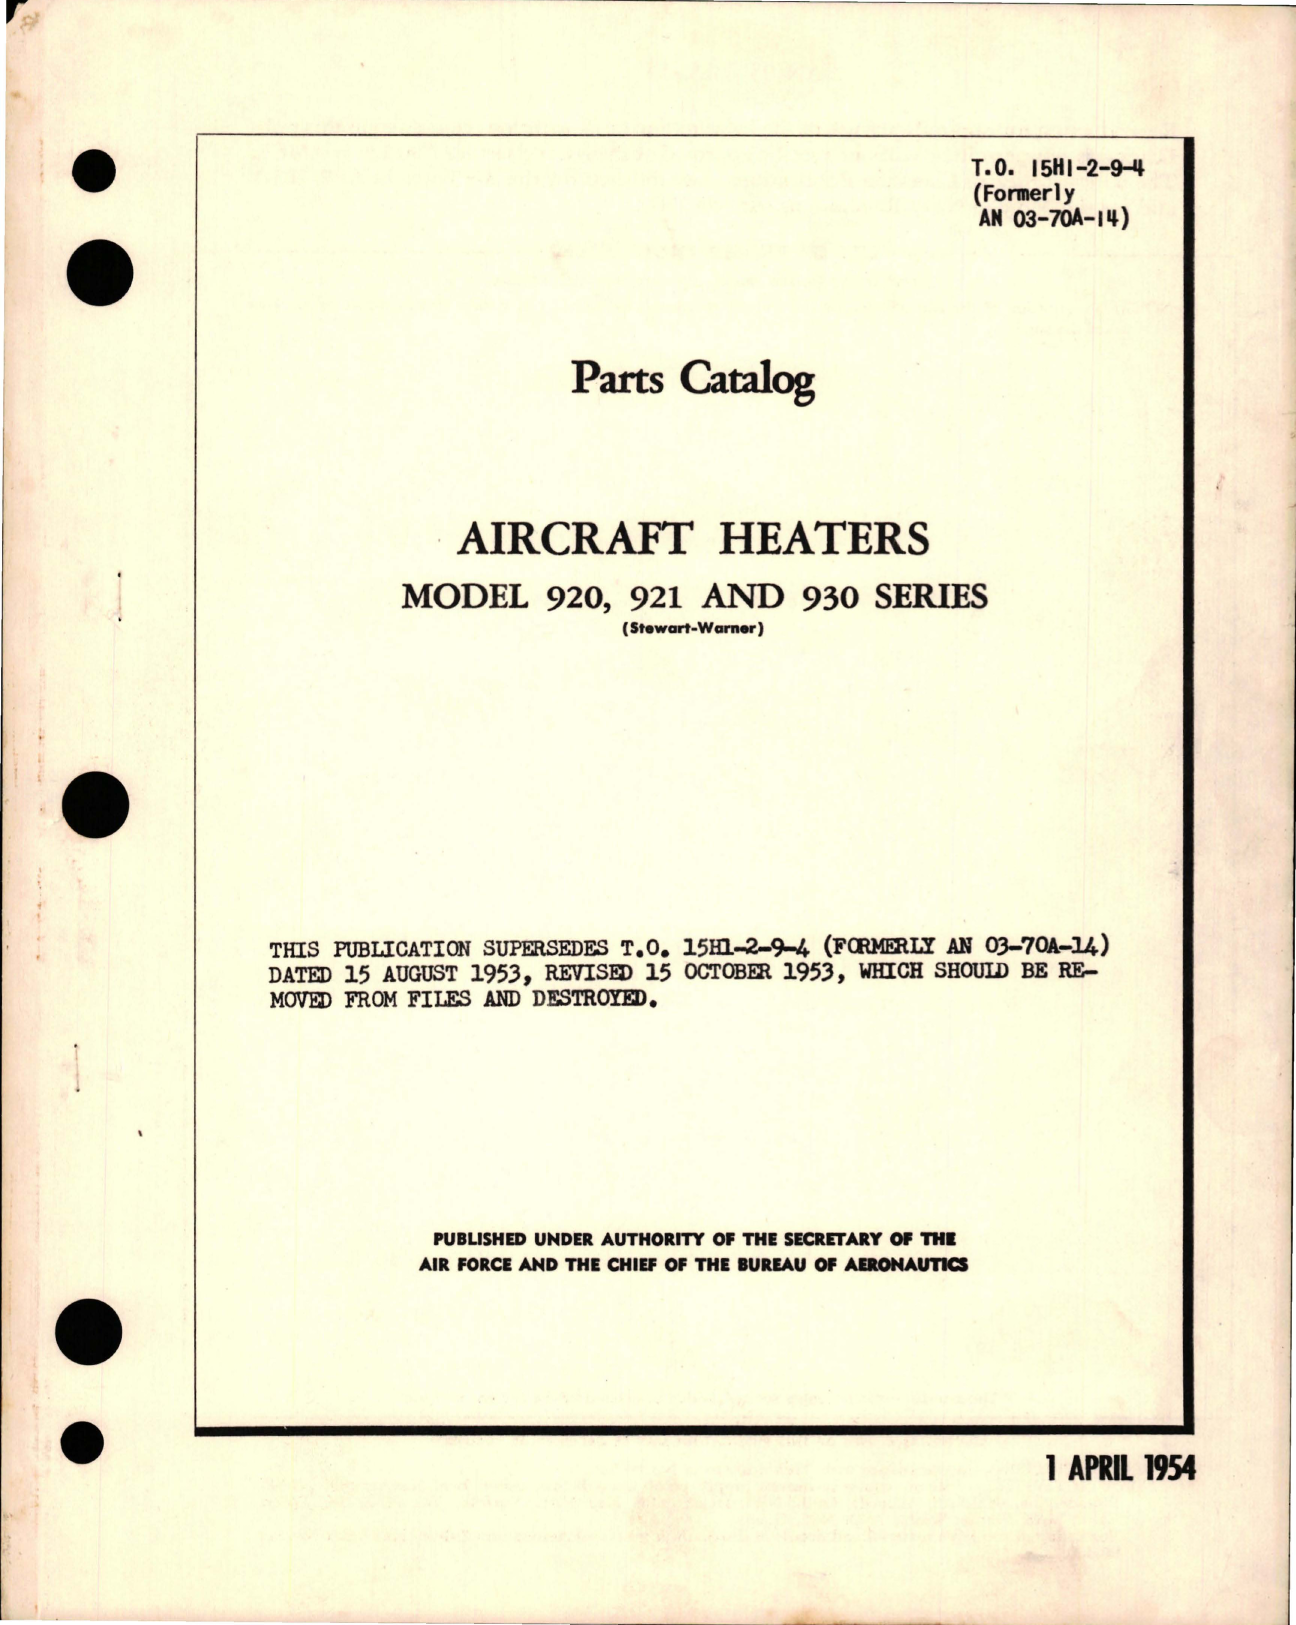 Sample page 1 from AirCorps Library document: Parts Catalog for Aircraft Heaters - Model 920, 921, and 930 Series